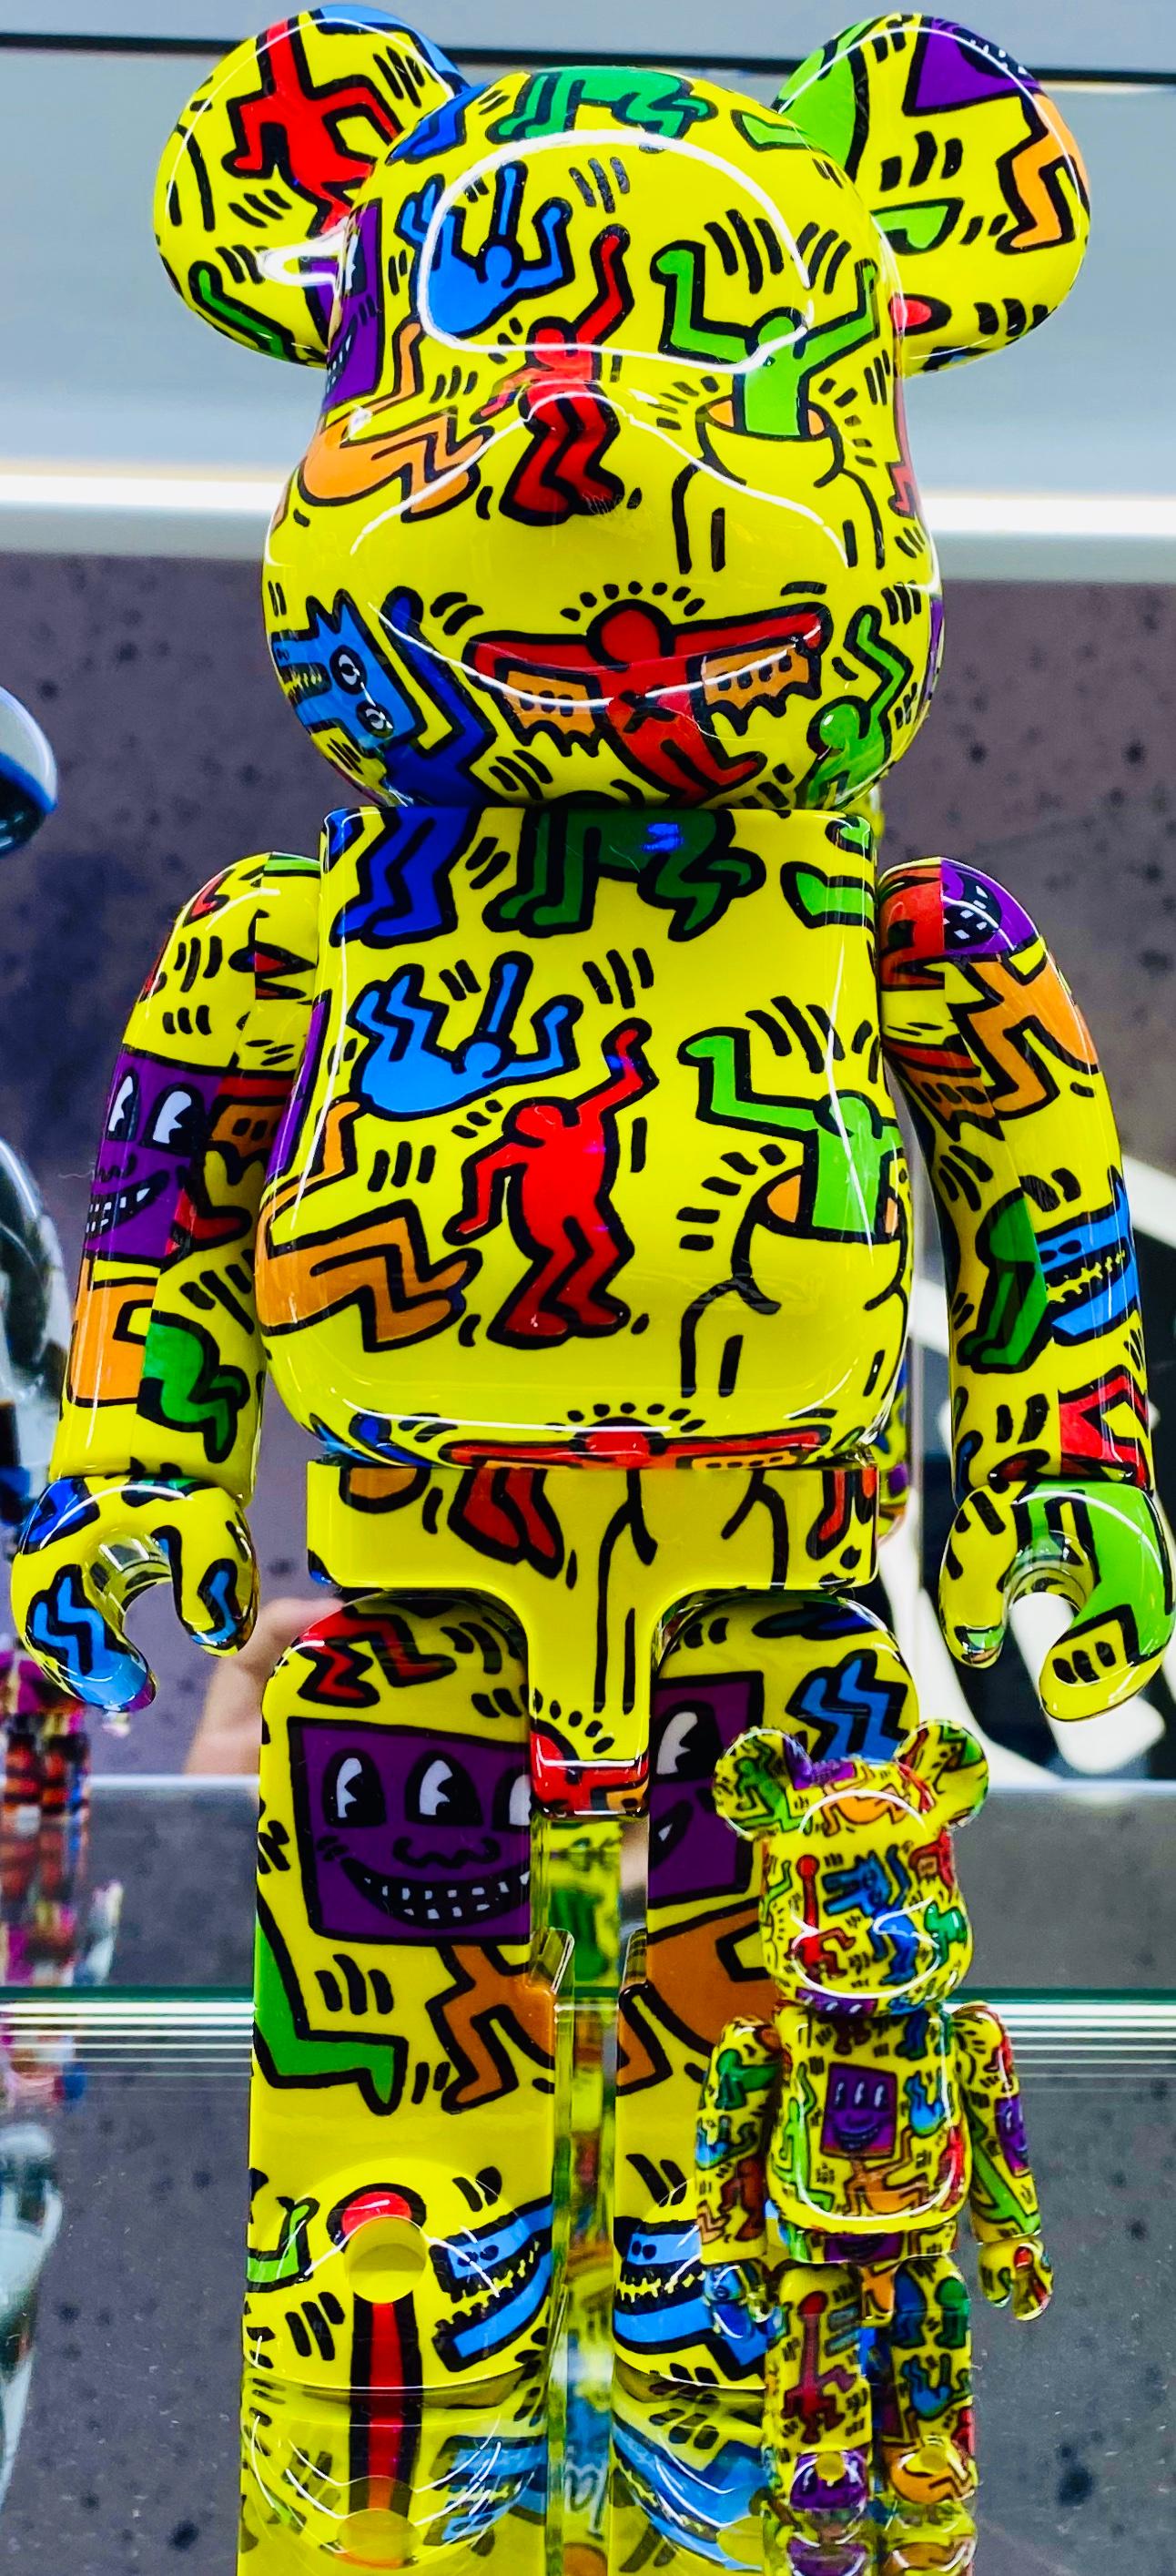 Keith Haring Bearbrick 400% Companion (Haring BE@RBRICK) - Print by (after) Keith Haring